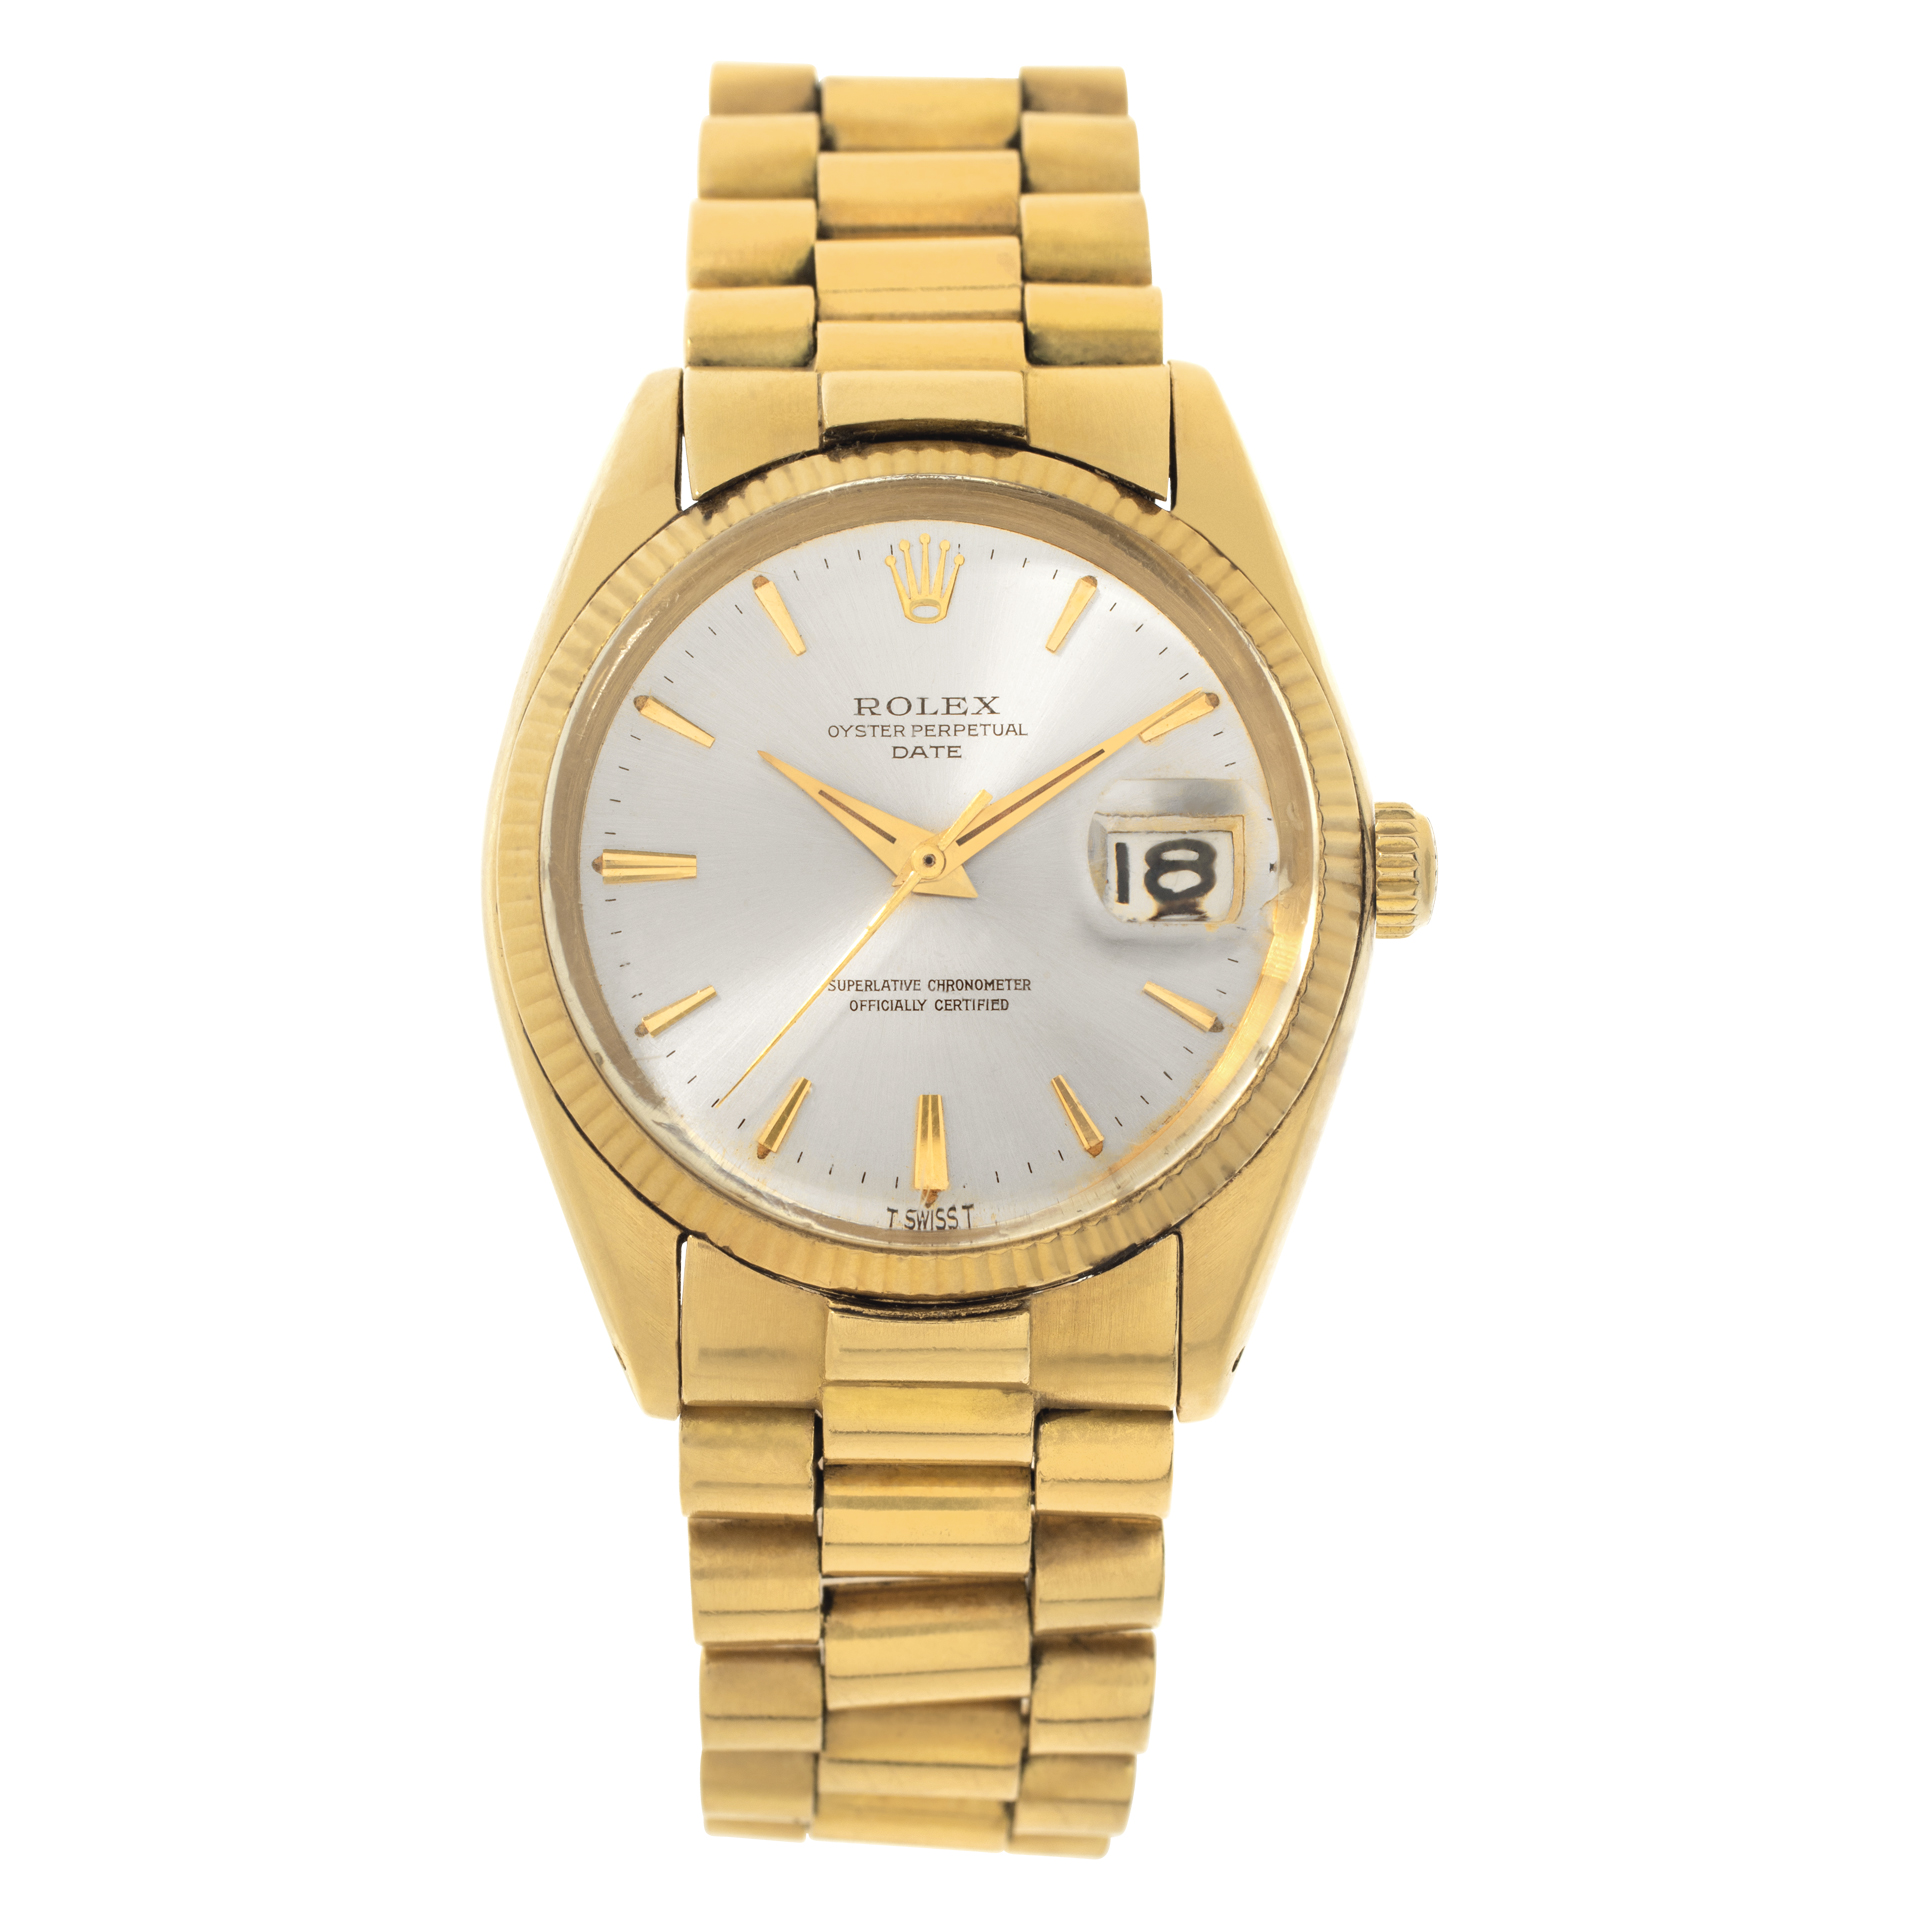 Used Rolex Certified | Gray & Sons Jewelers